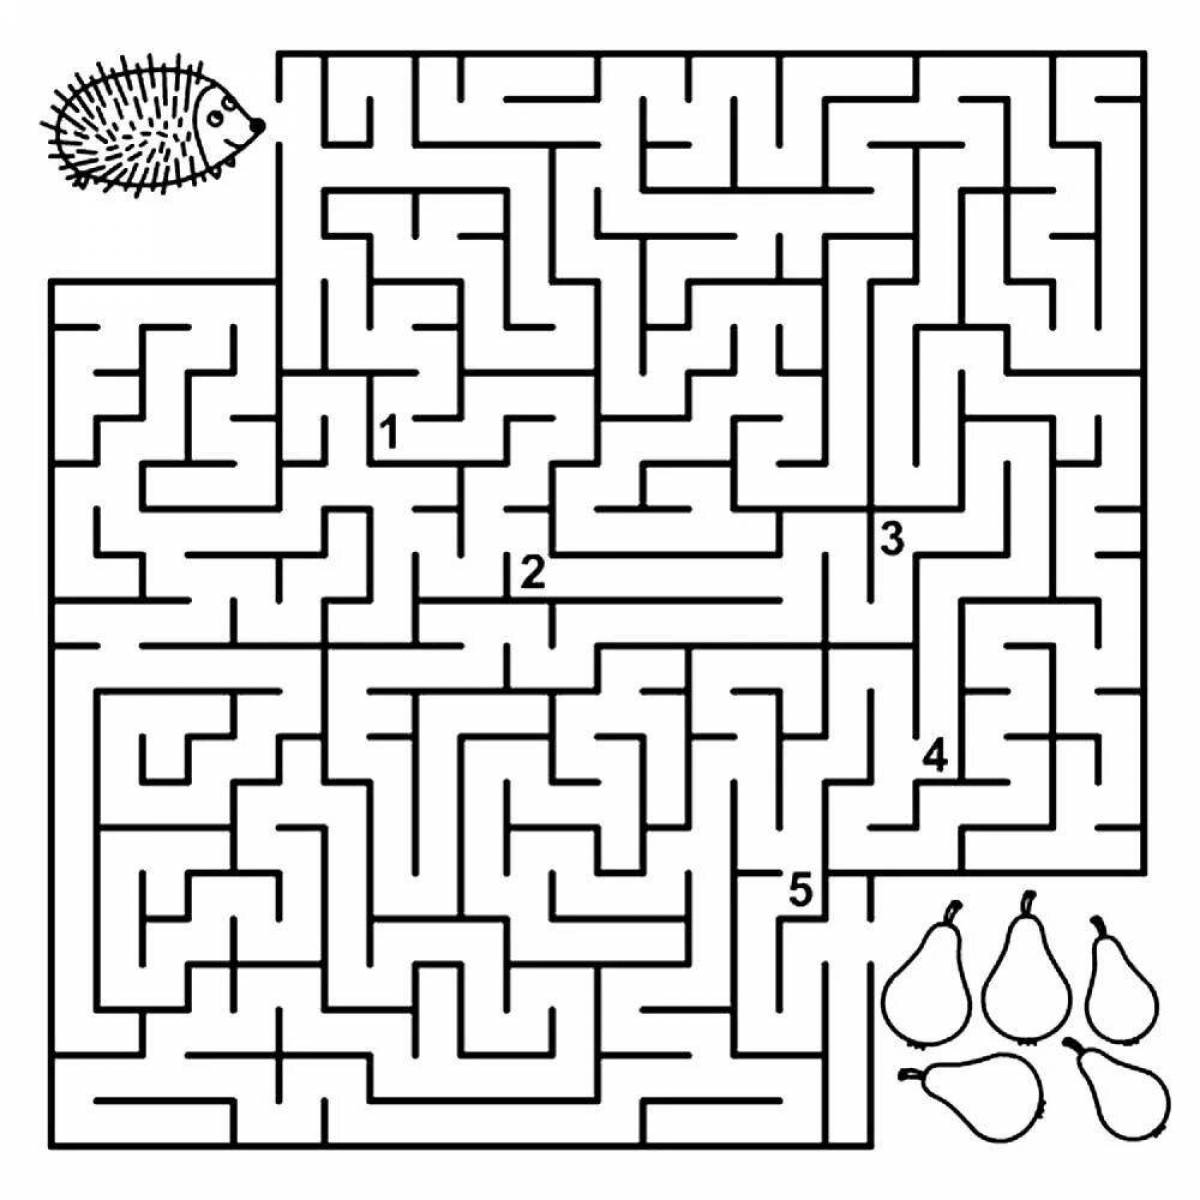 Charming maze coloring book for kids 6-7 years old